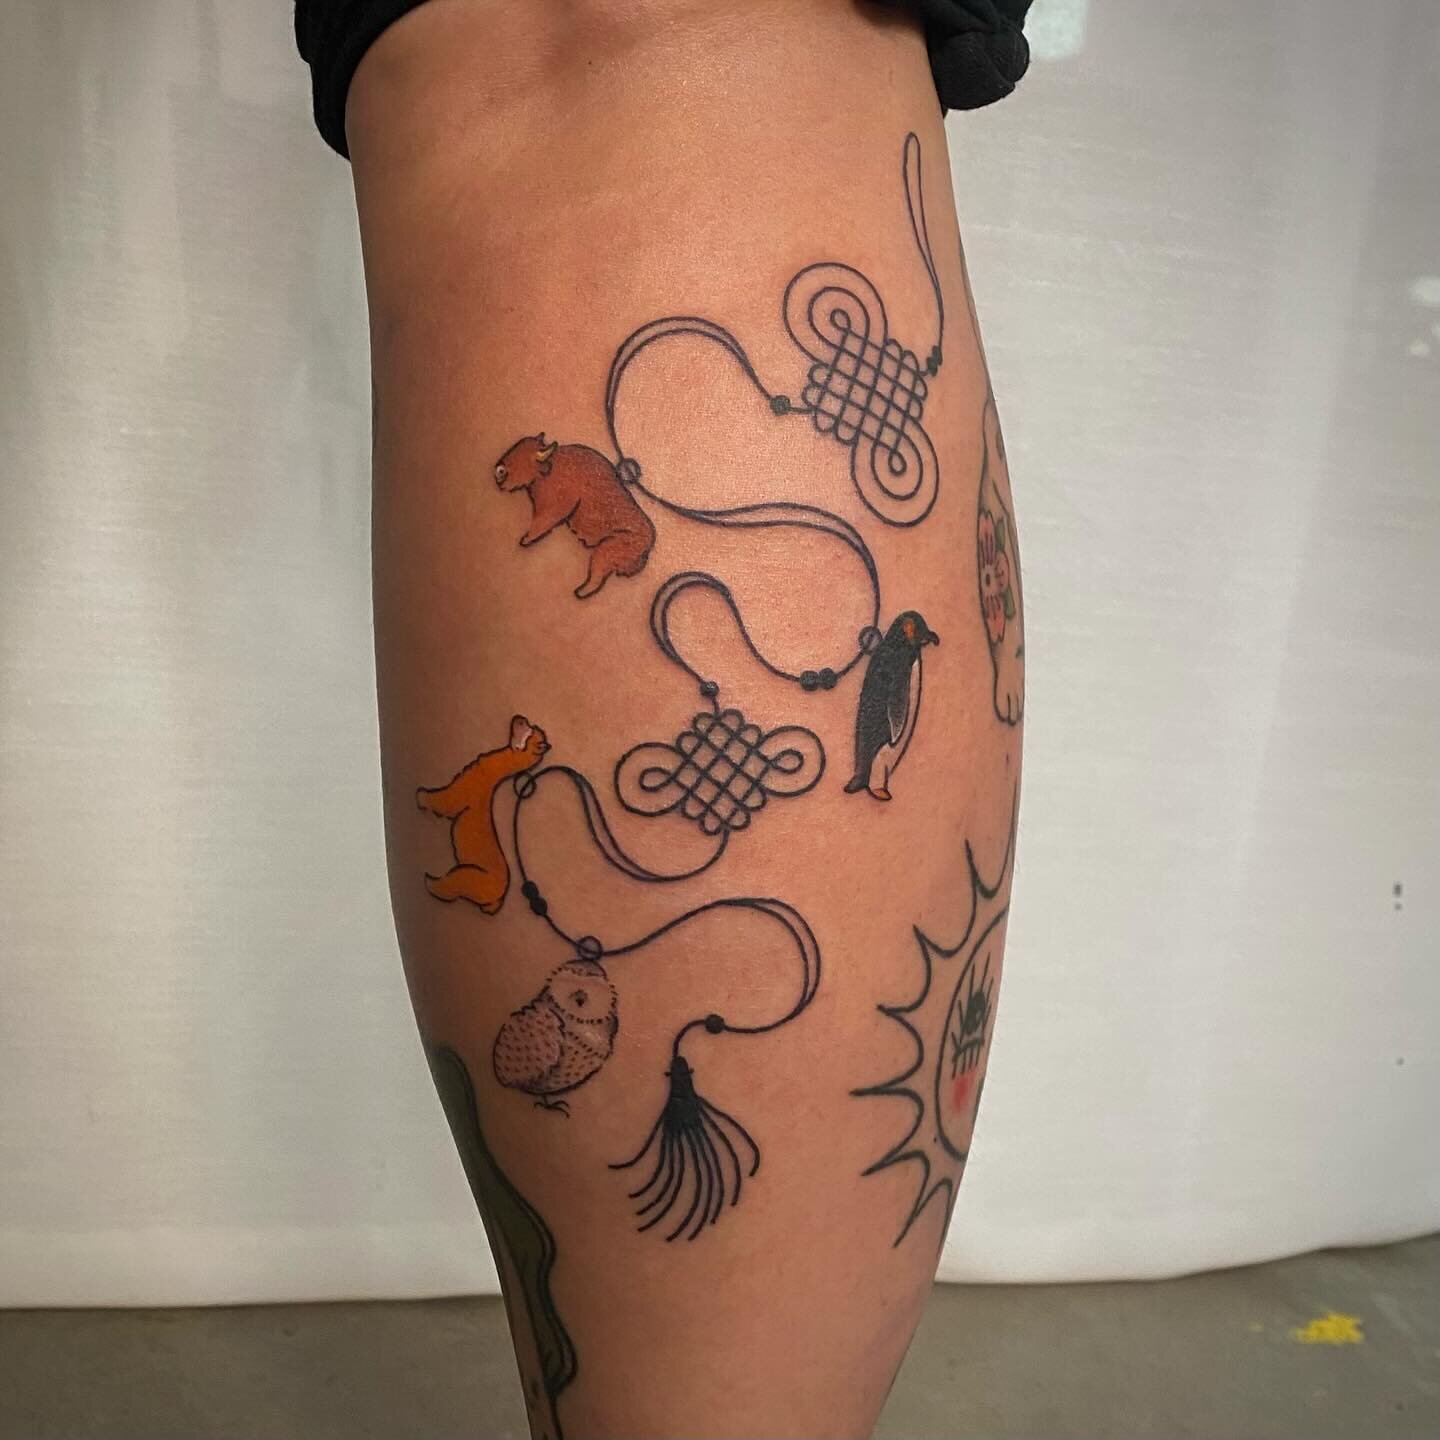 Custom knot &amp; charms for J, thank u for stopping by while you were in town!! ✨🦬🐧🦙🦉✨

Hmu for flash or custom - available from the last week of Nov onwards :) will be getting back to emails this week!
.
.
.
#vancouvertattoo #vancouvertattooart